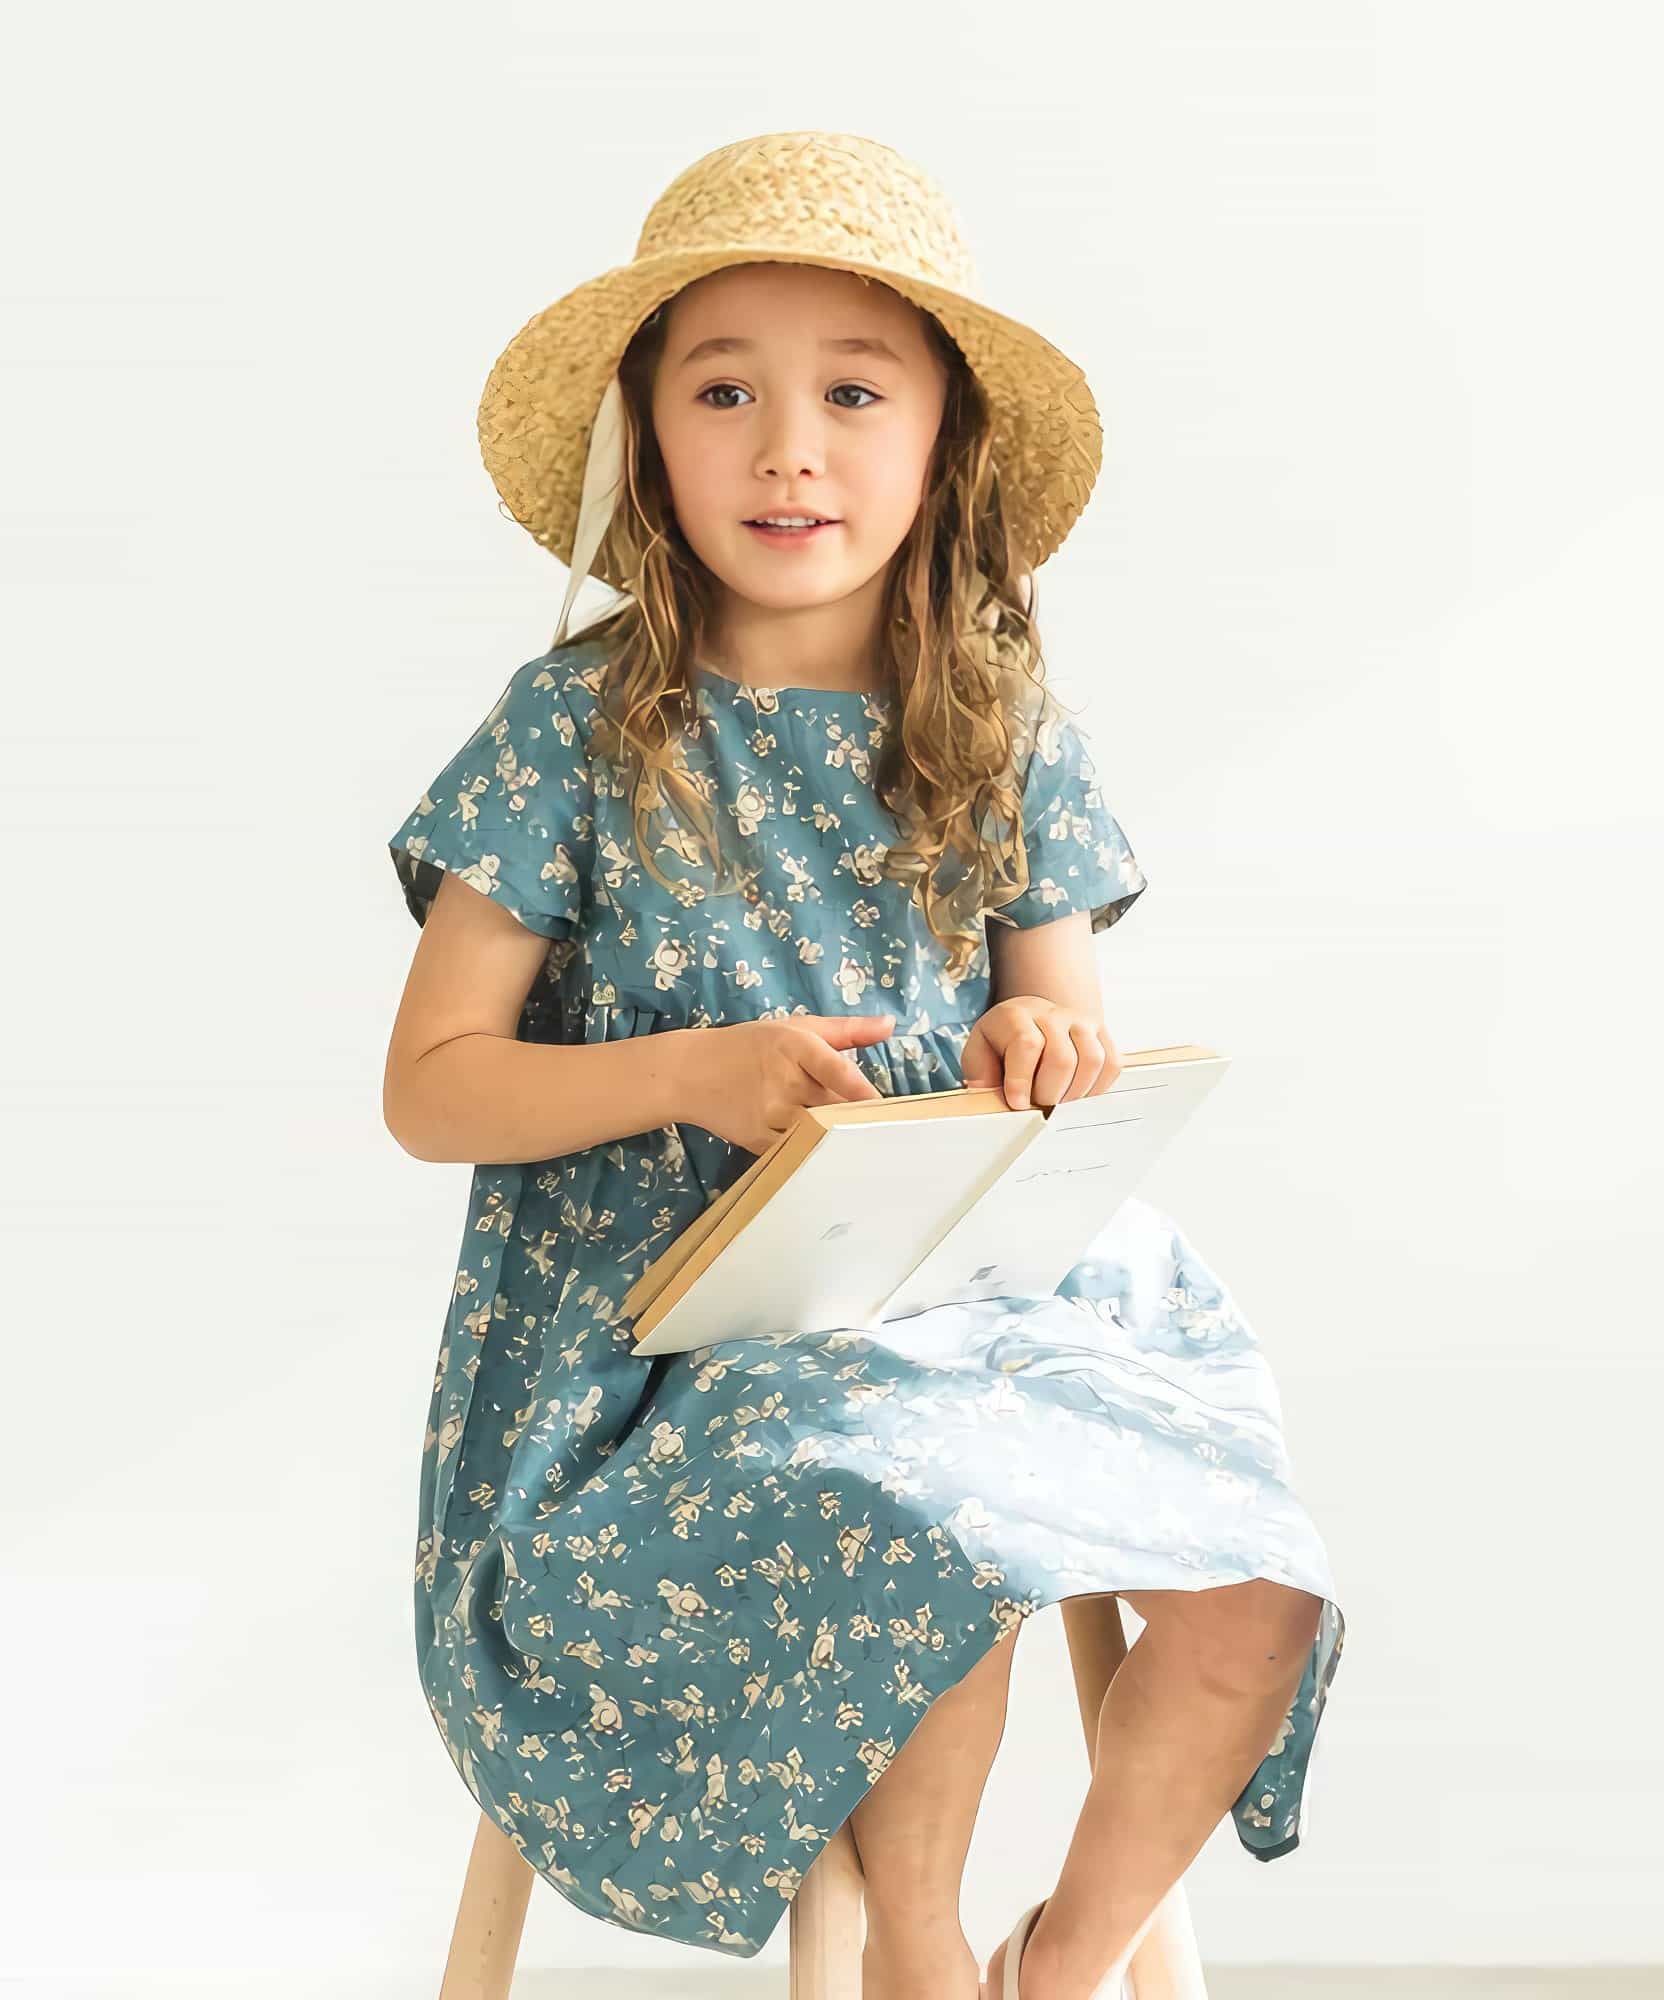 Girls casual blue dress, floral pattern, short sleeve, made of cotton, knee-length